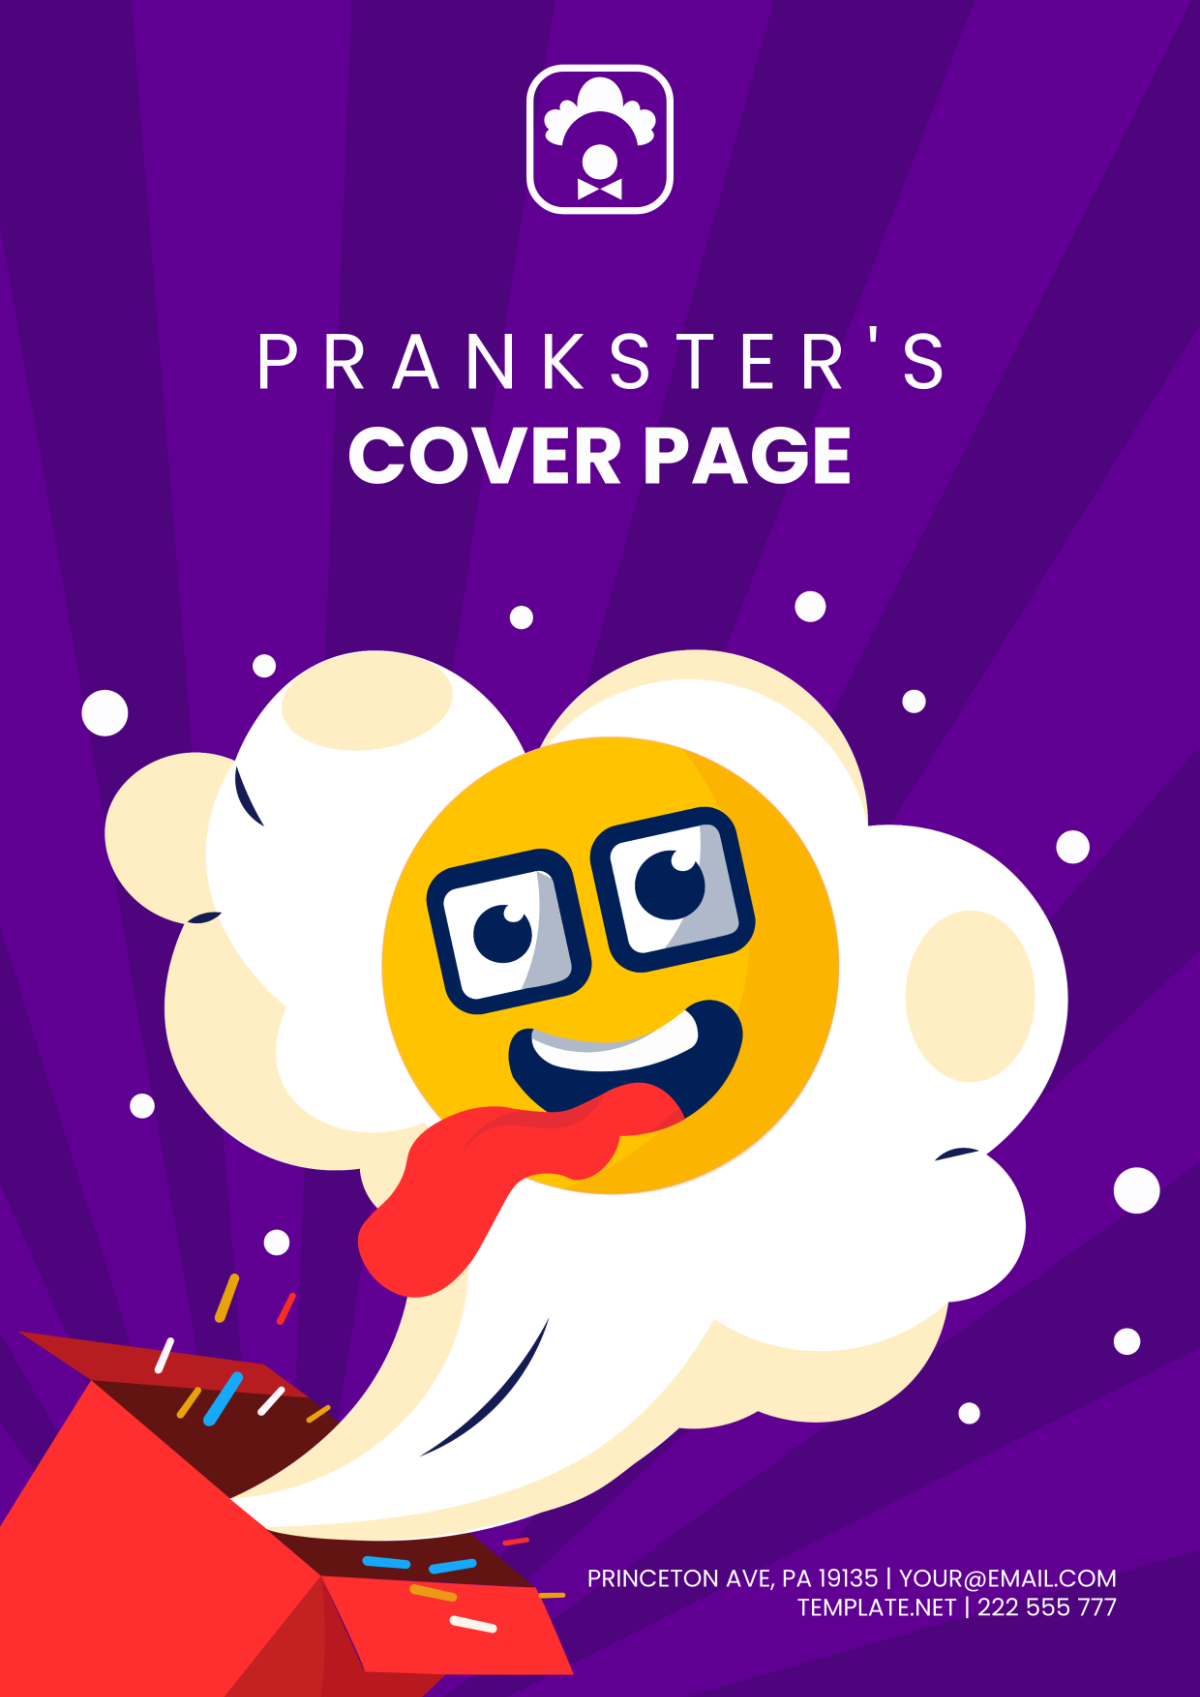 Prankster's Cover Page Template